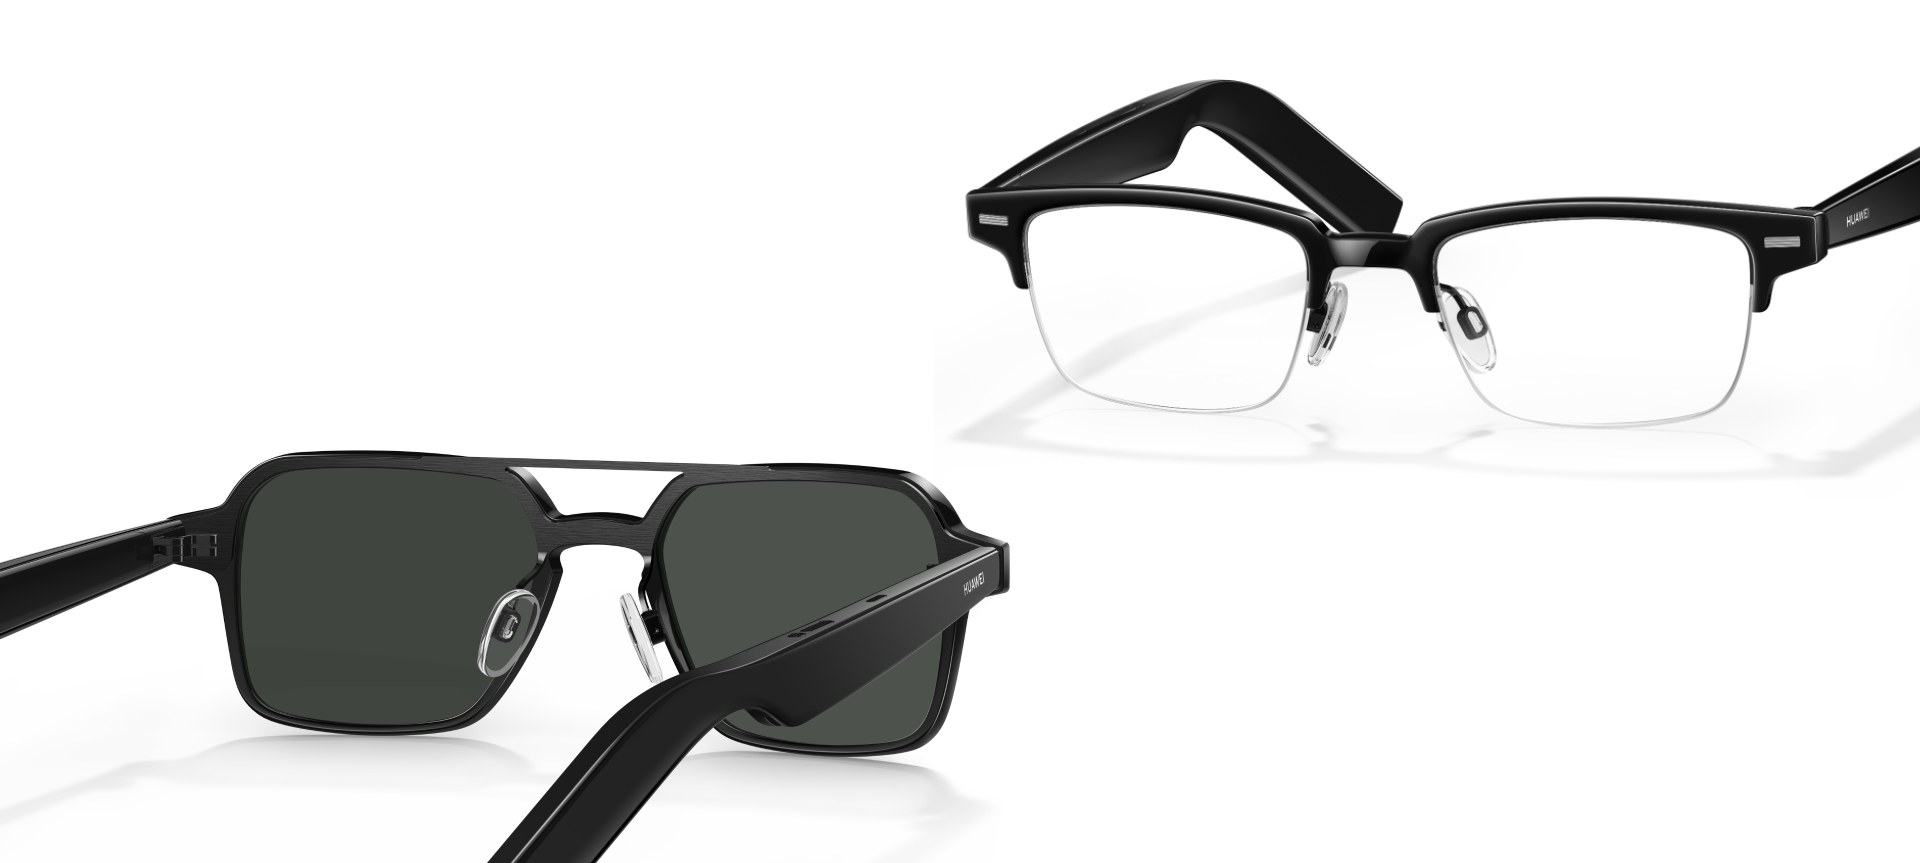 Huawei Eyewear 2 smart glasses with speakers and Zeiss